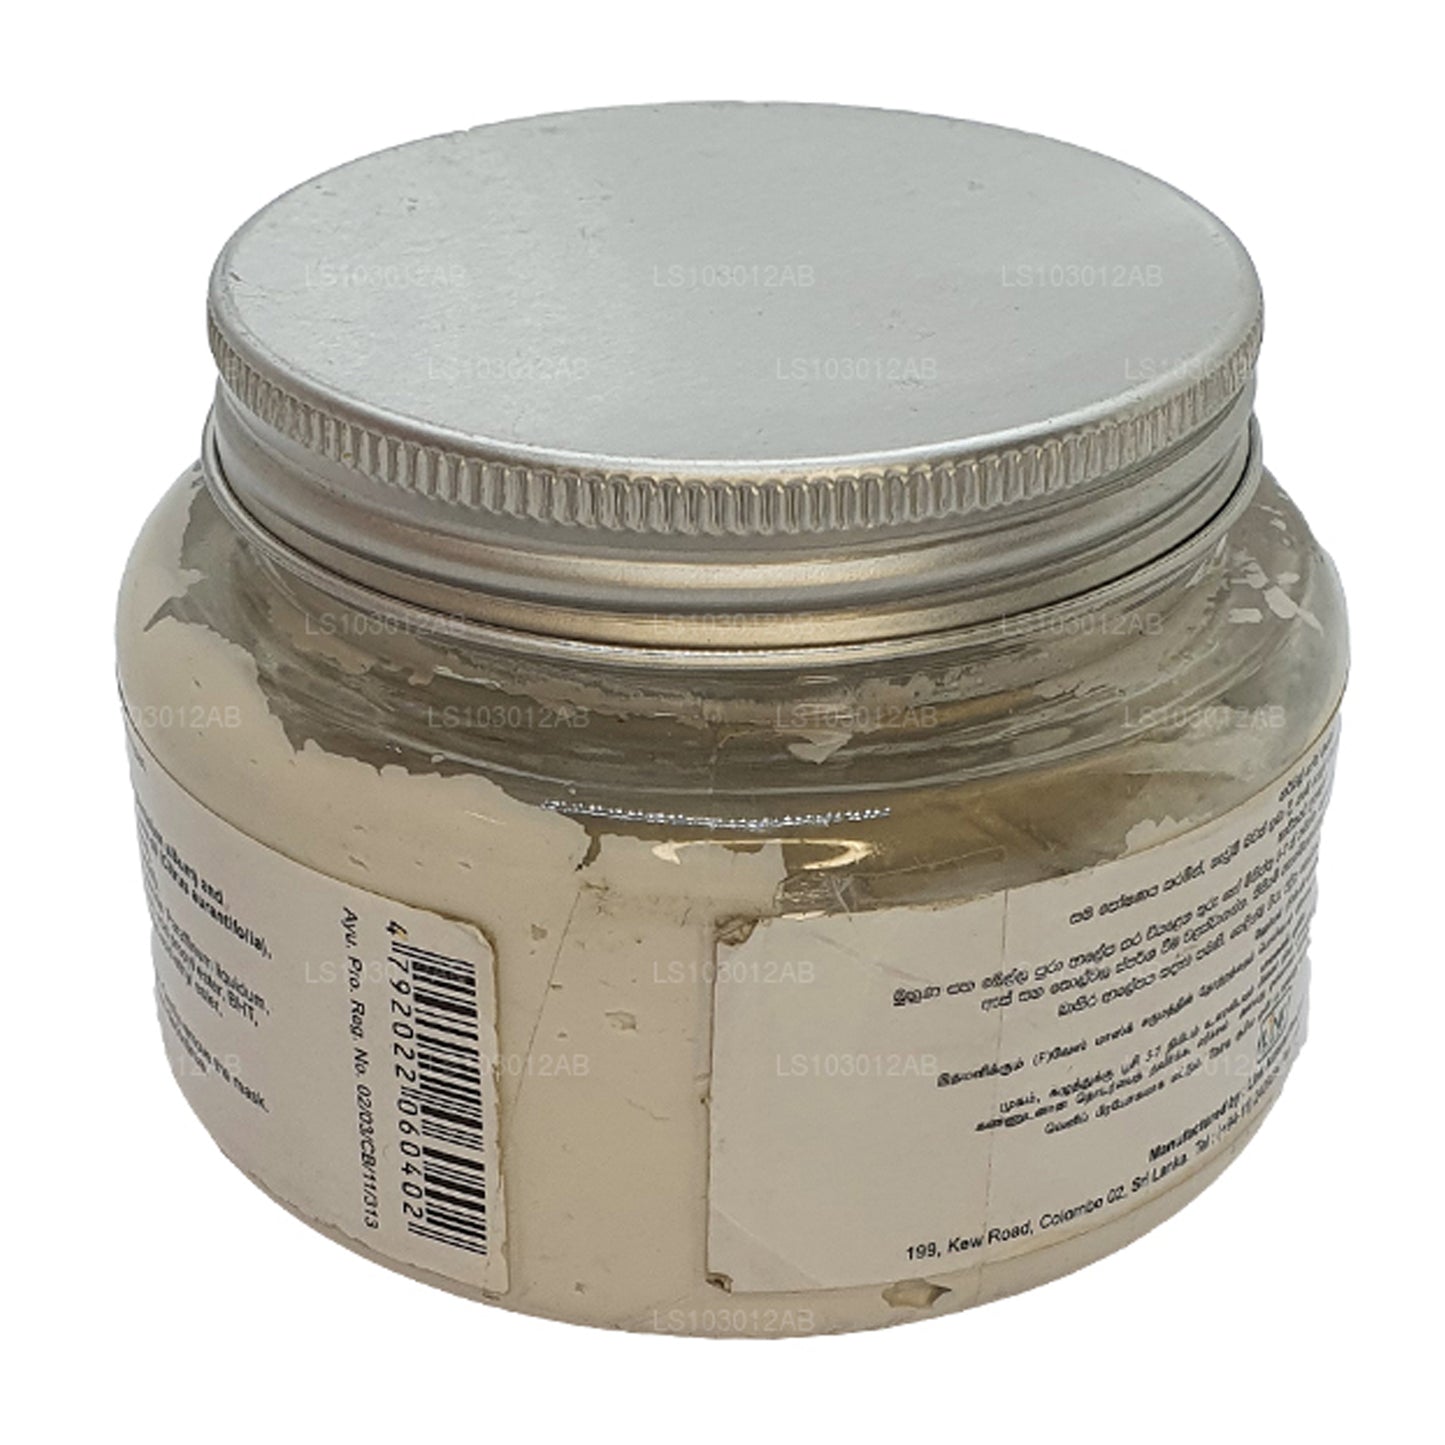 Earth Essence Herbal Face Mask (200g)